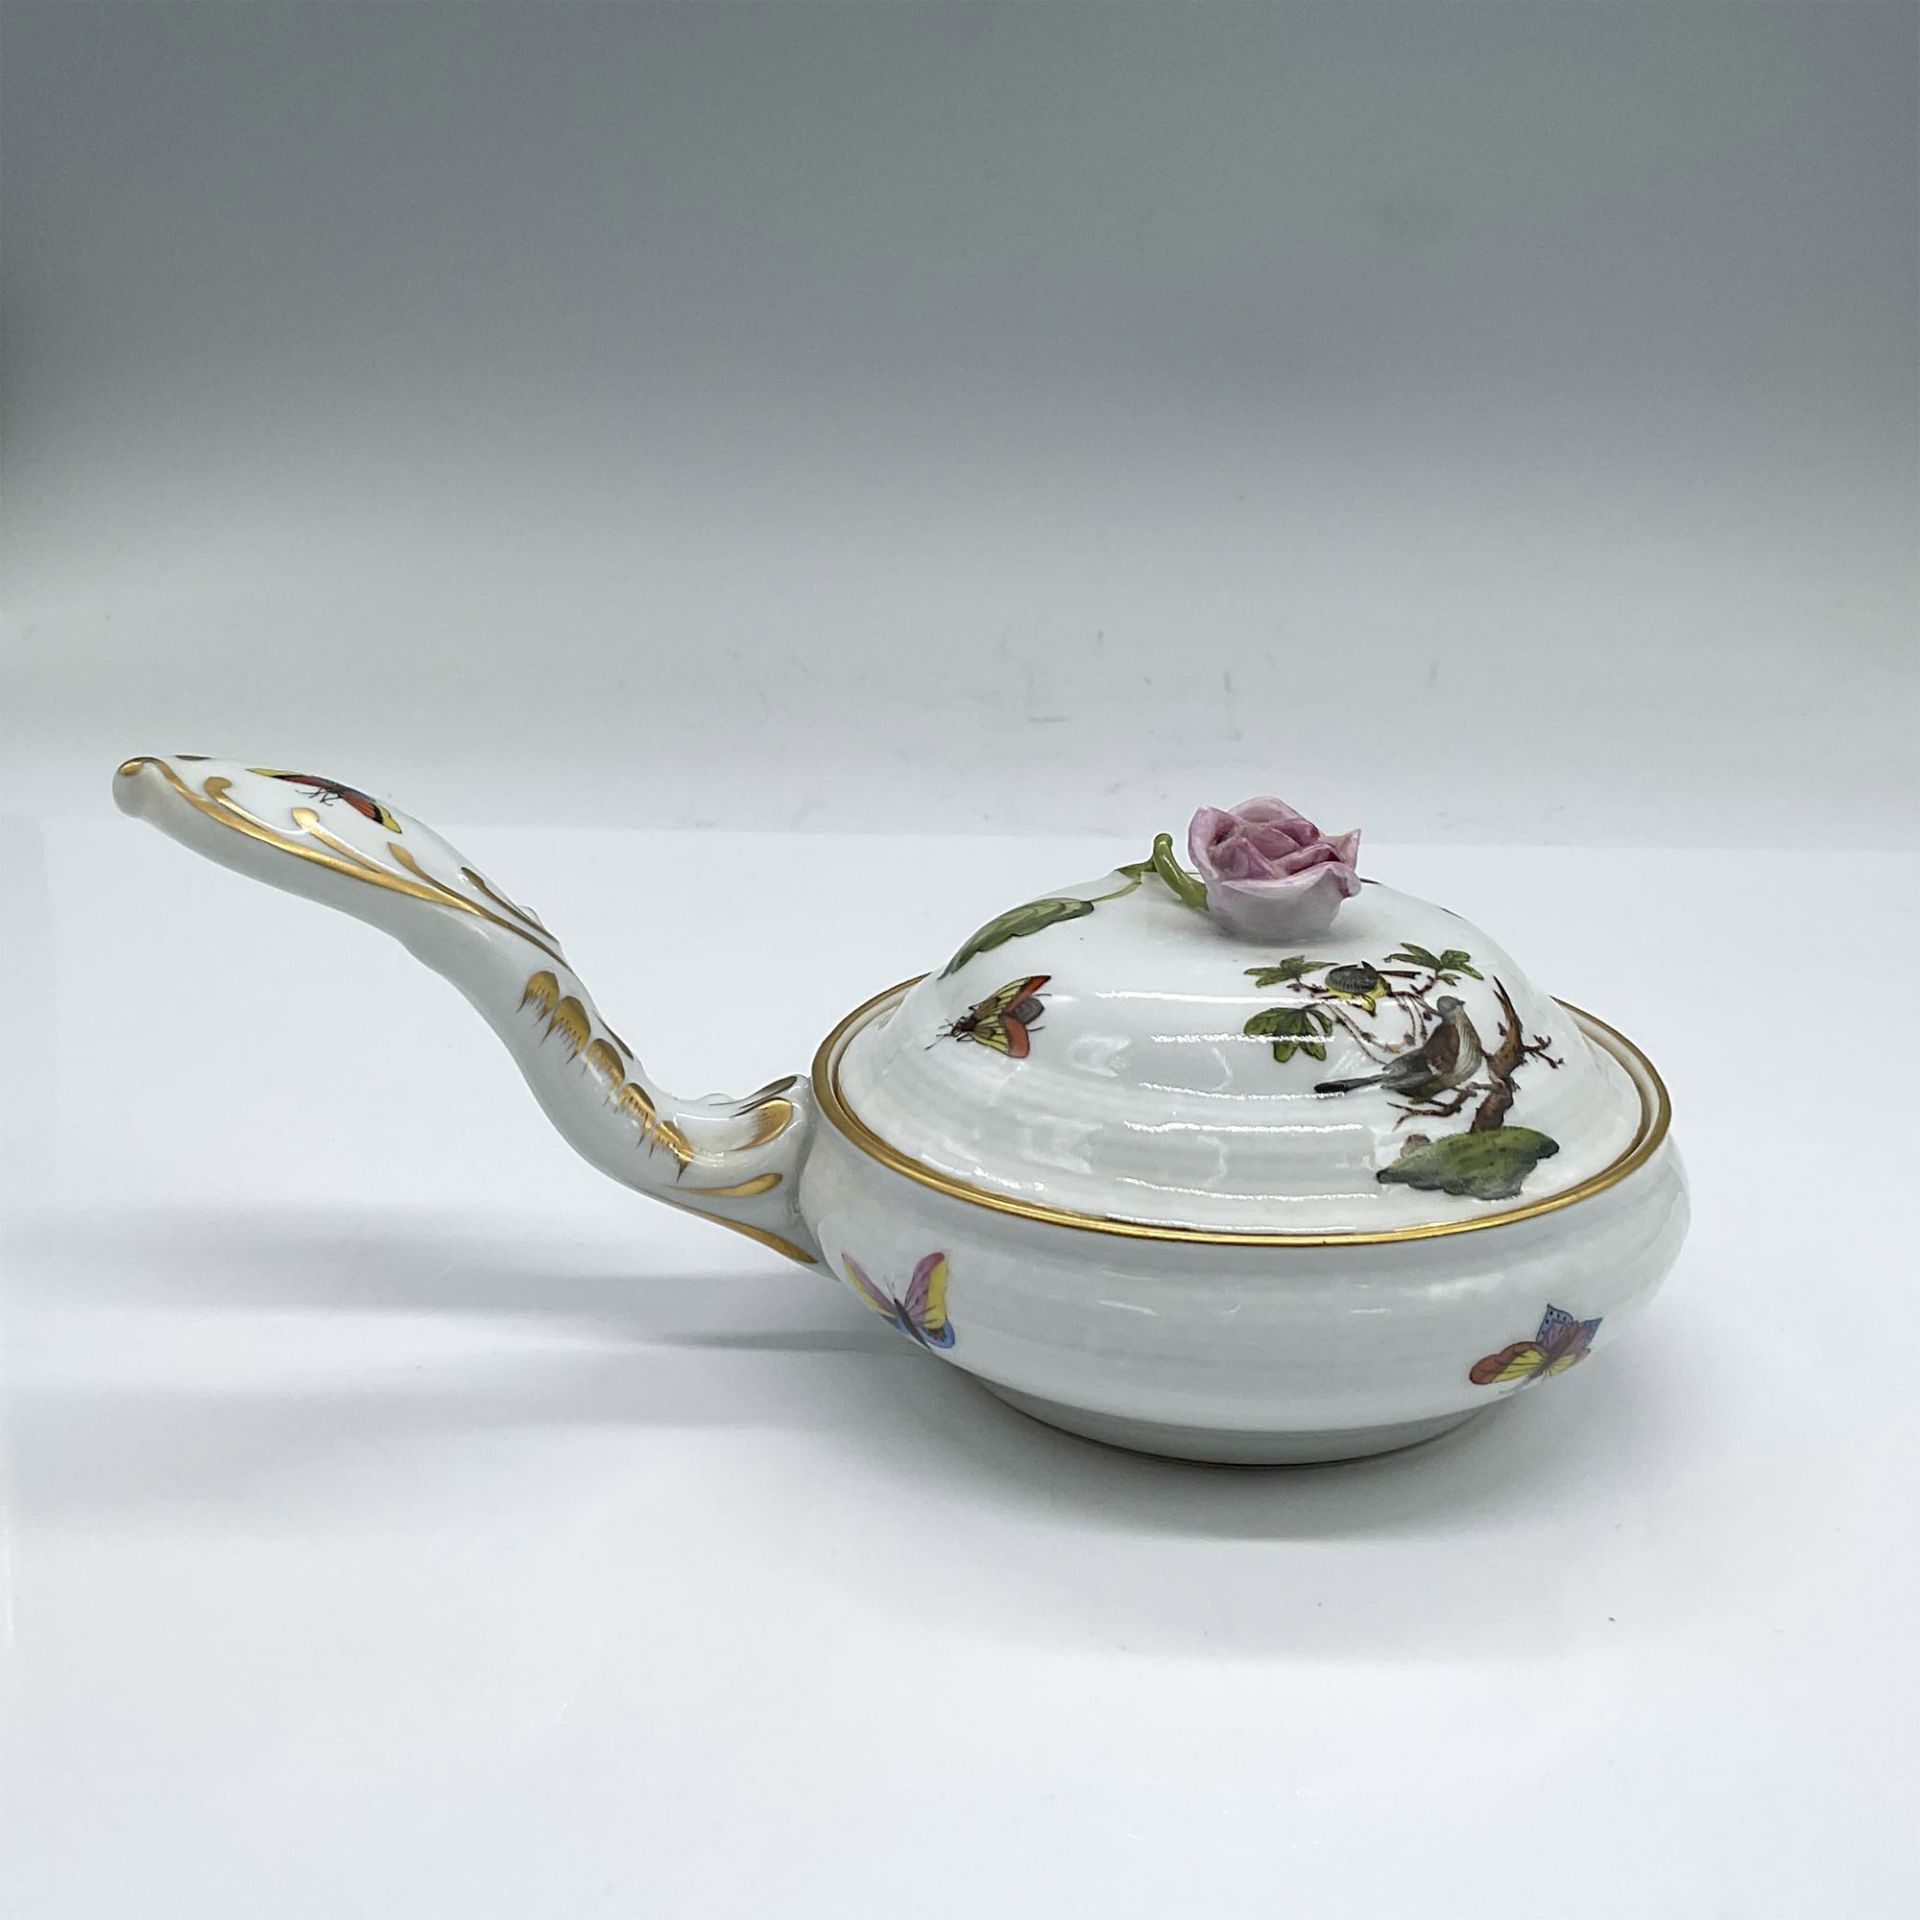 Herend Porcelain Patty Pan, Flowers and Butterflies - Image 2 of 4